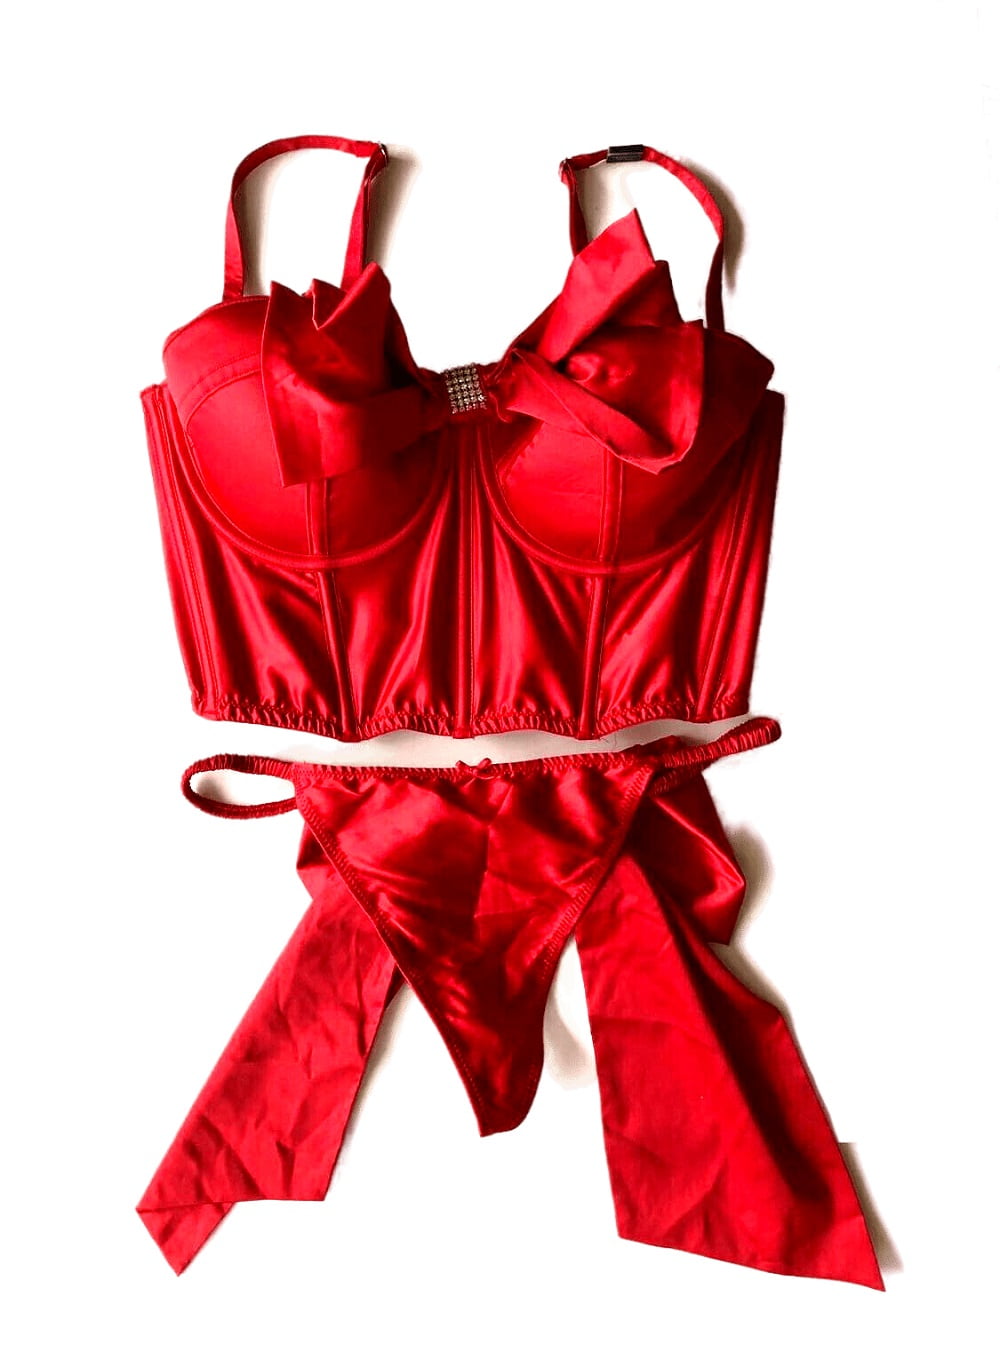 Victoria’s Secret NWT 34C Sexy Red Cupped Bow Bra Top Corset Style